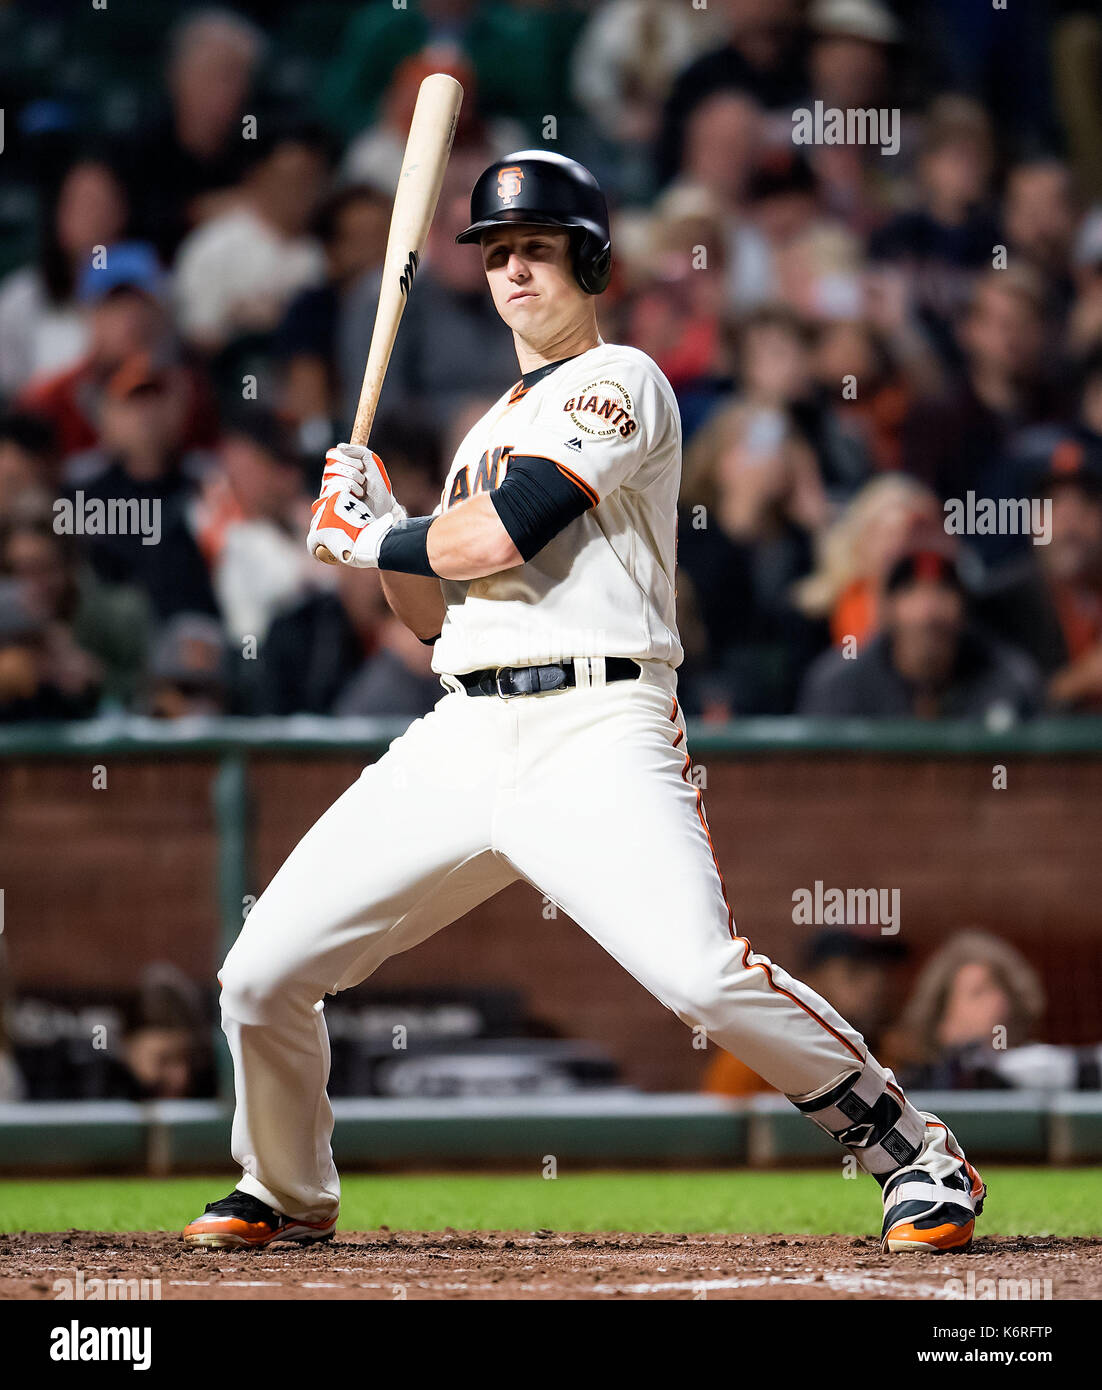 San Francisco, California, USA. 13th Sep, 2017. San Francisco Giants first baseman Buster Posey (28) takes an inside pitch in the second inning, during a MLB game between the Los Angeles Dodgers and the San Francisco Giants at AT&T Park in San Francisco, California. Valerie Shoaps/CSM/Alamy Live News Stock Photo